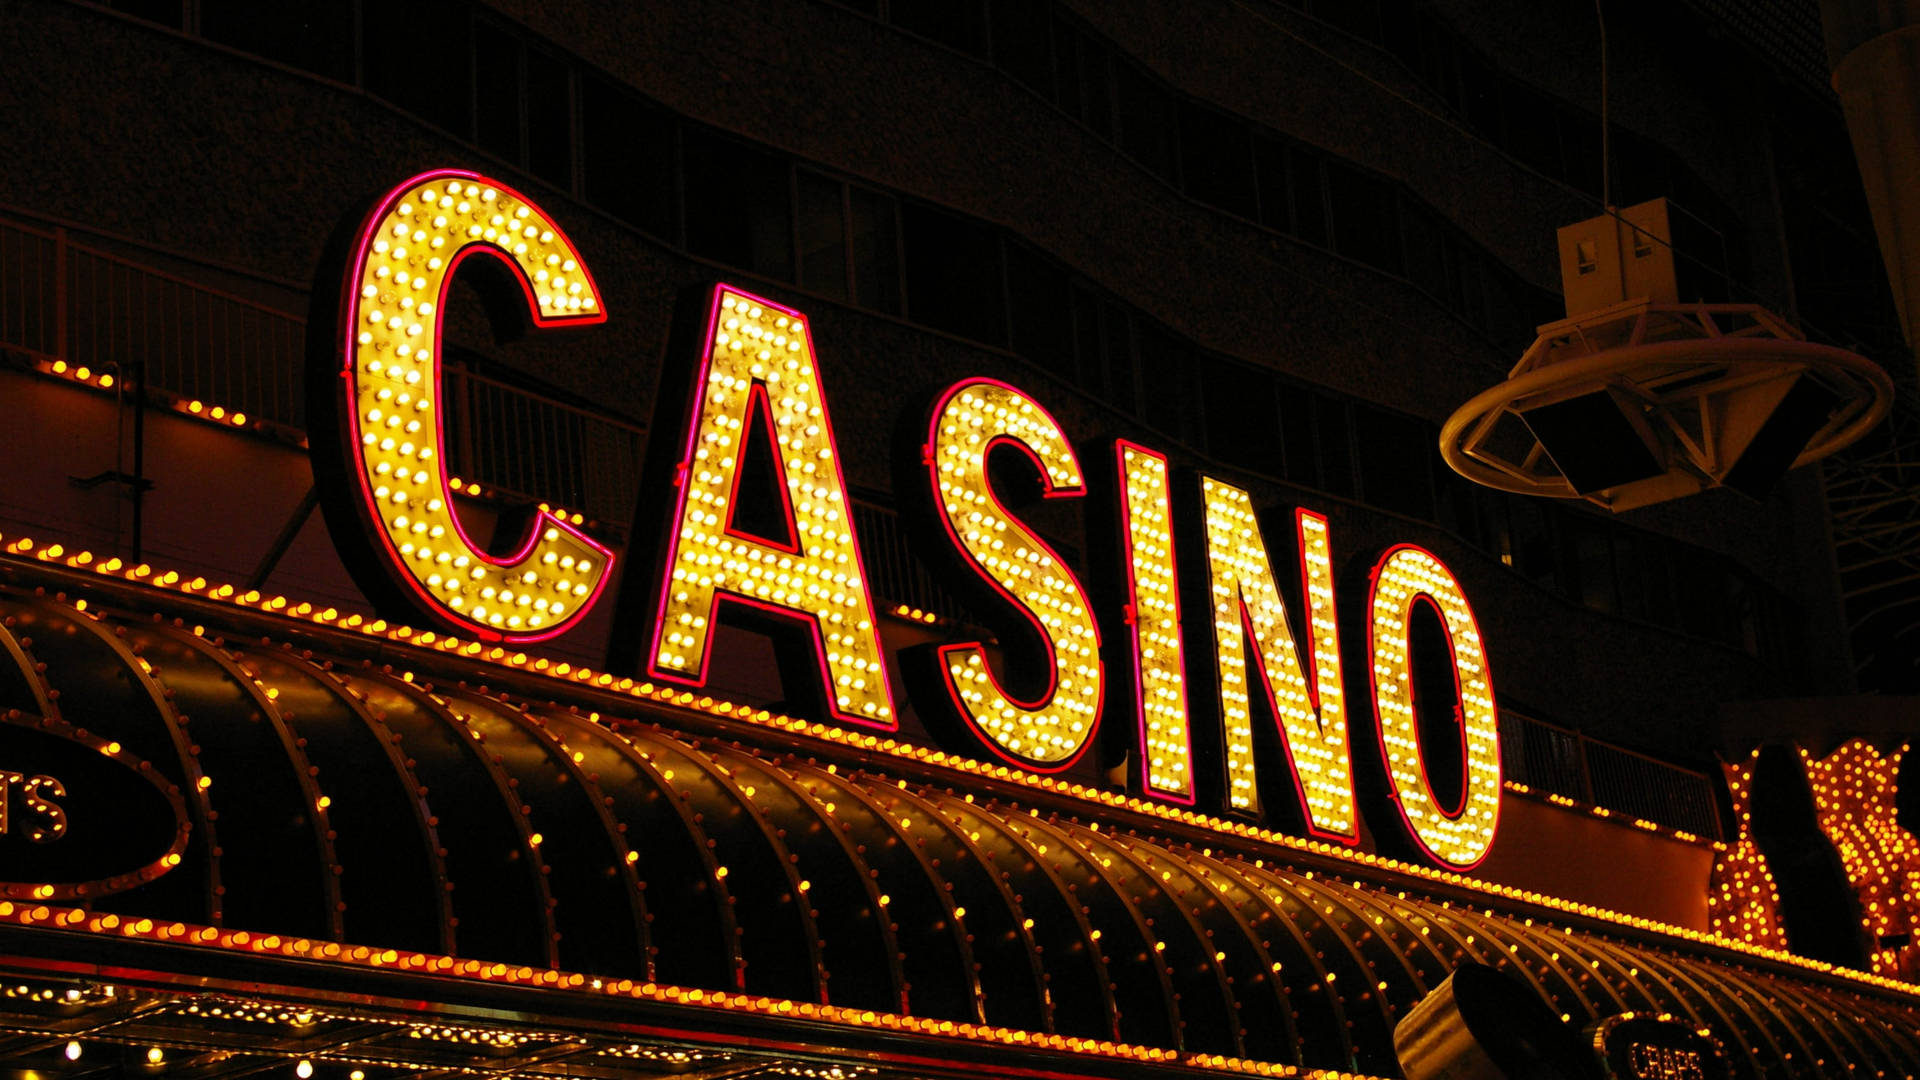 Las Vegas 3840X2160 Wallpaper and Background Image